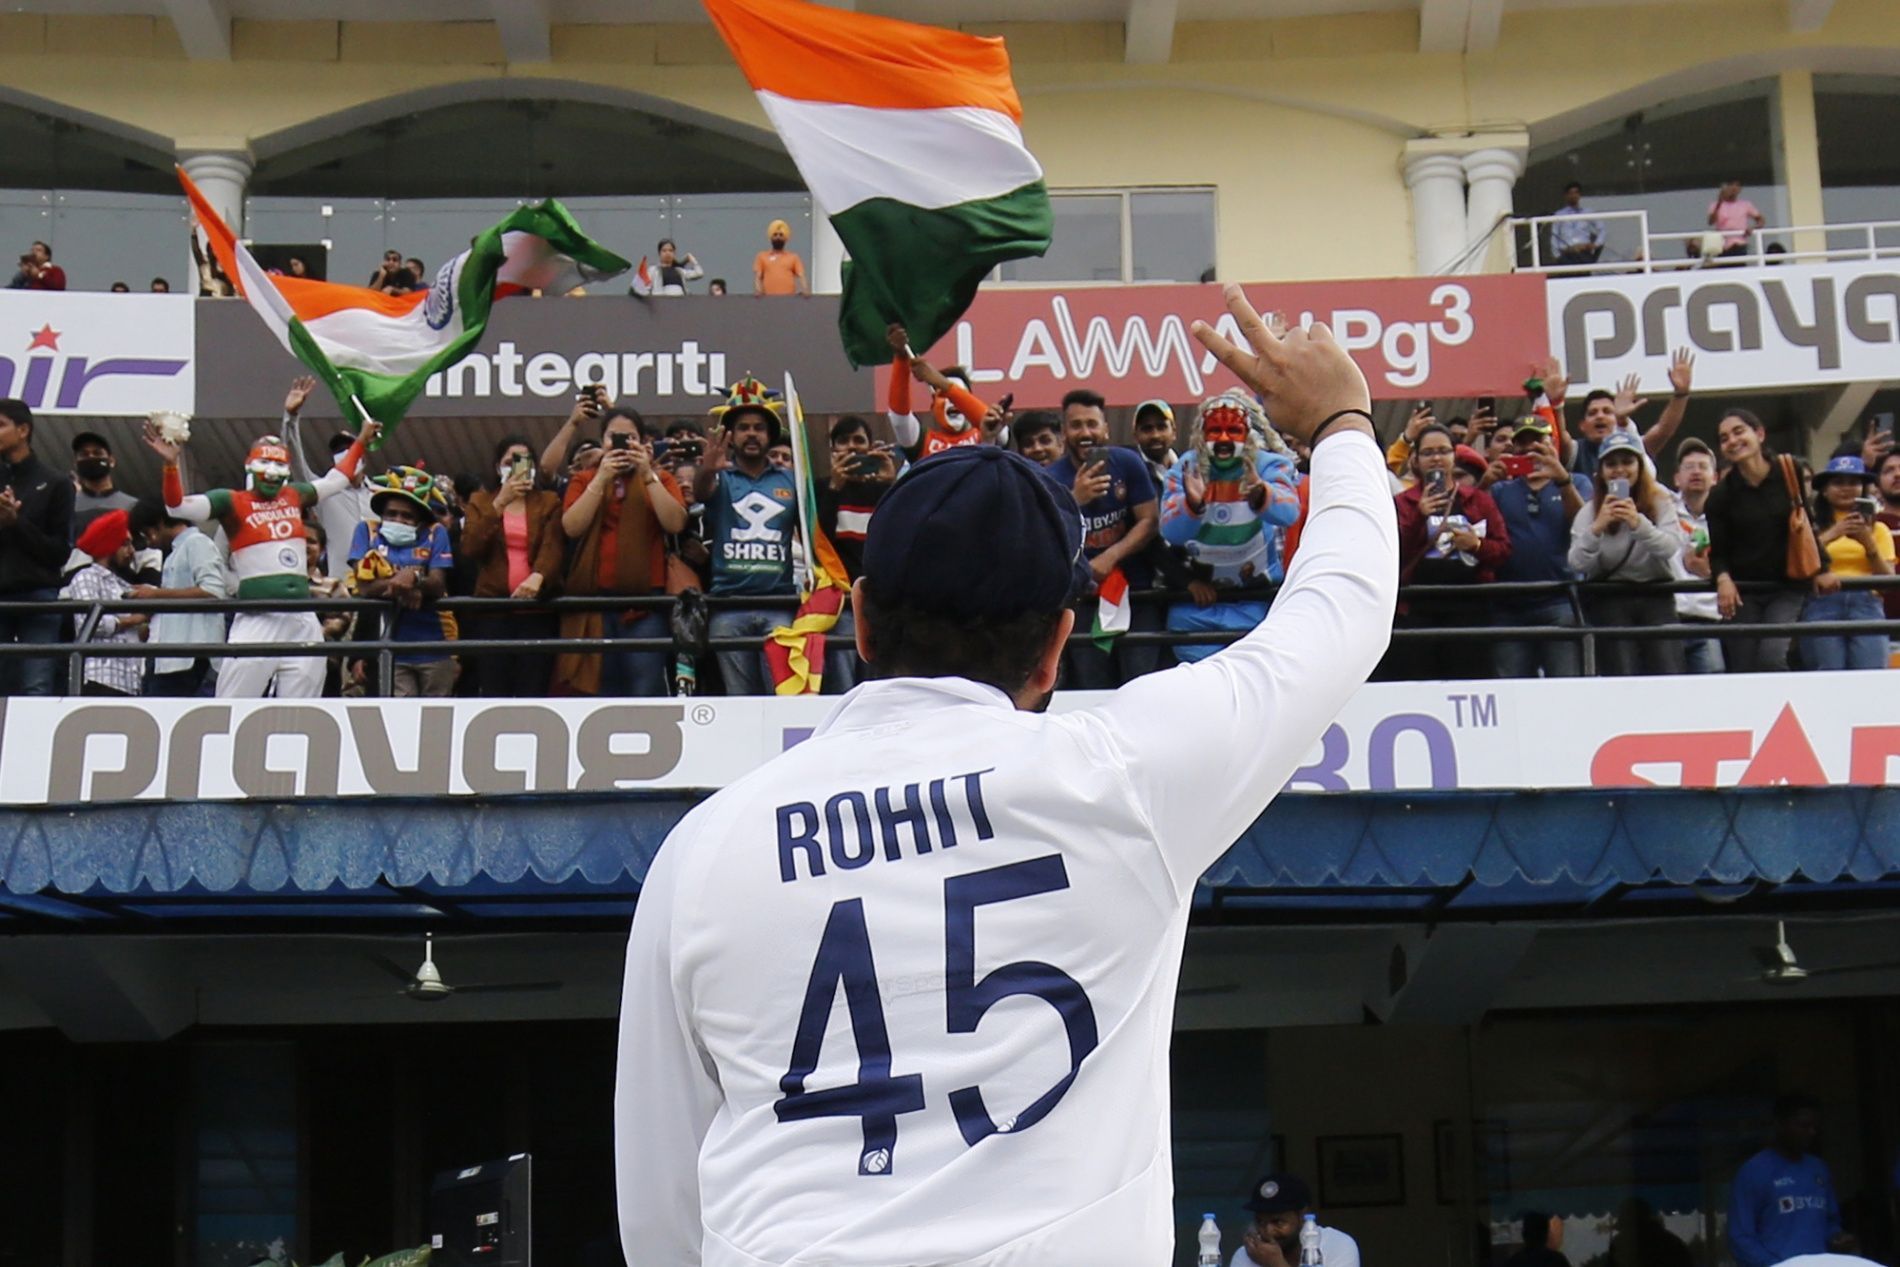 Rohit Sharma led Team India to a massive win in his first Test as skipper [P/C: BCCI]